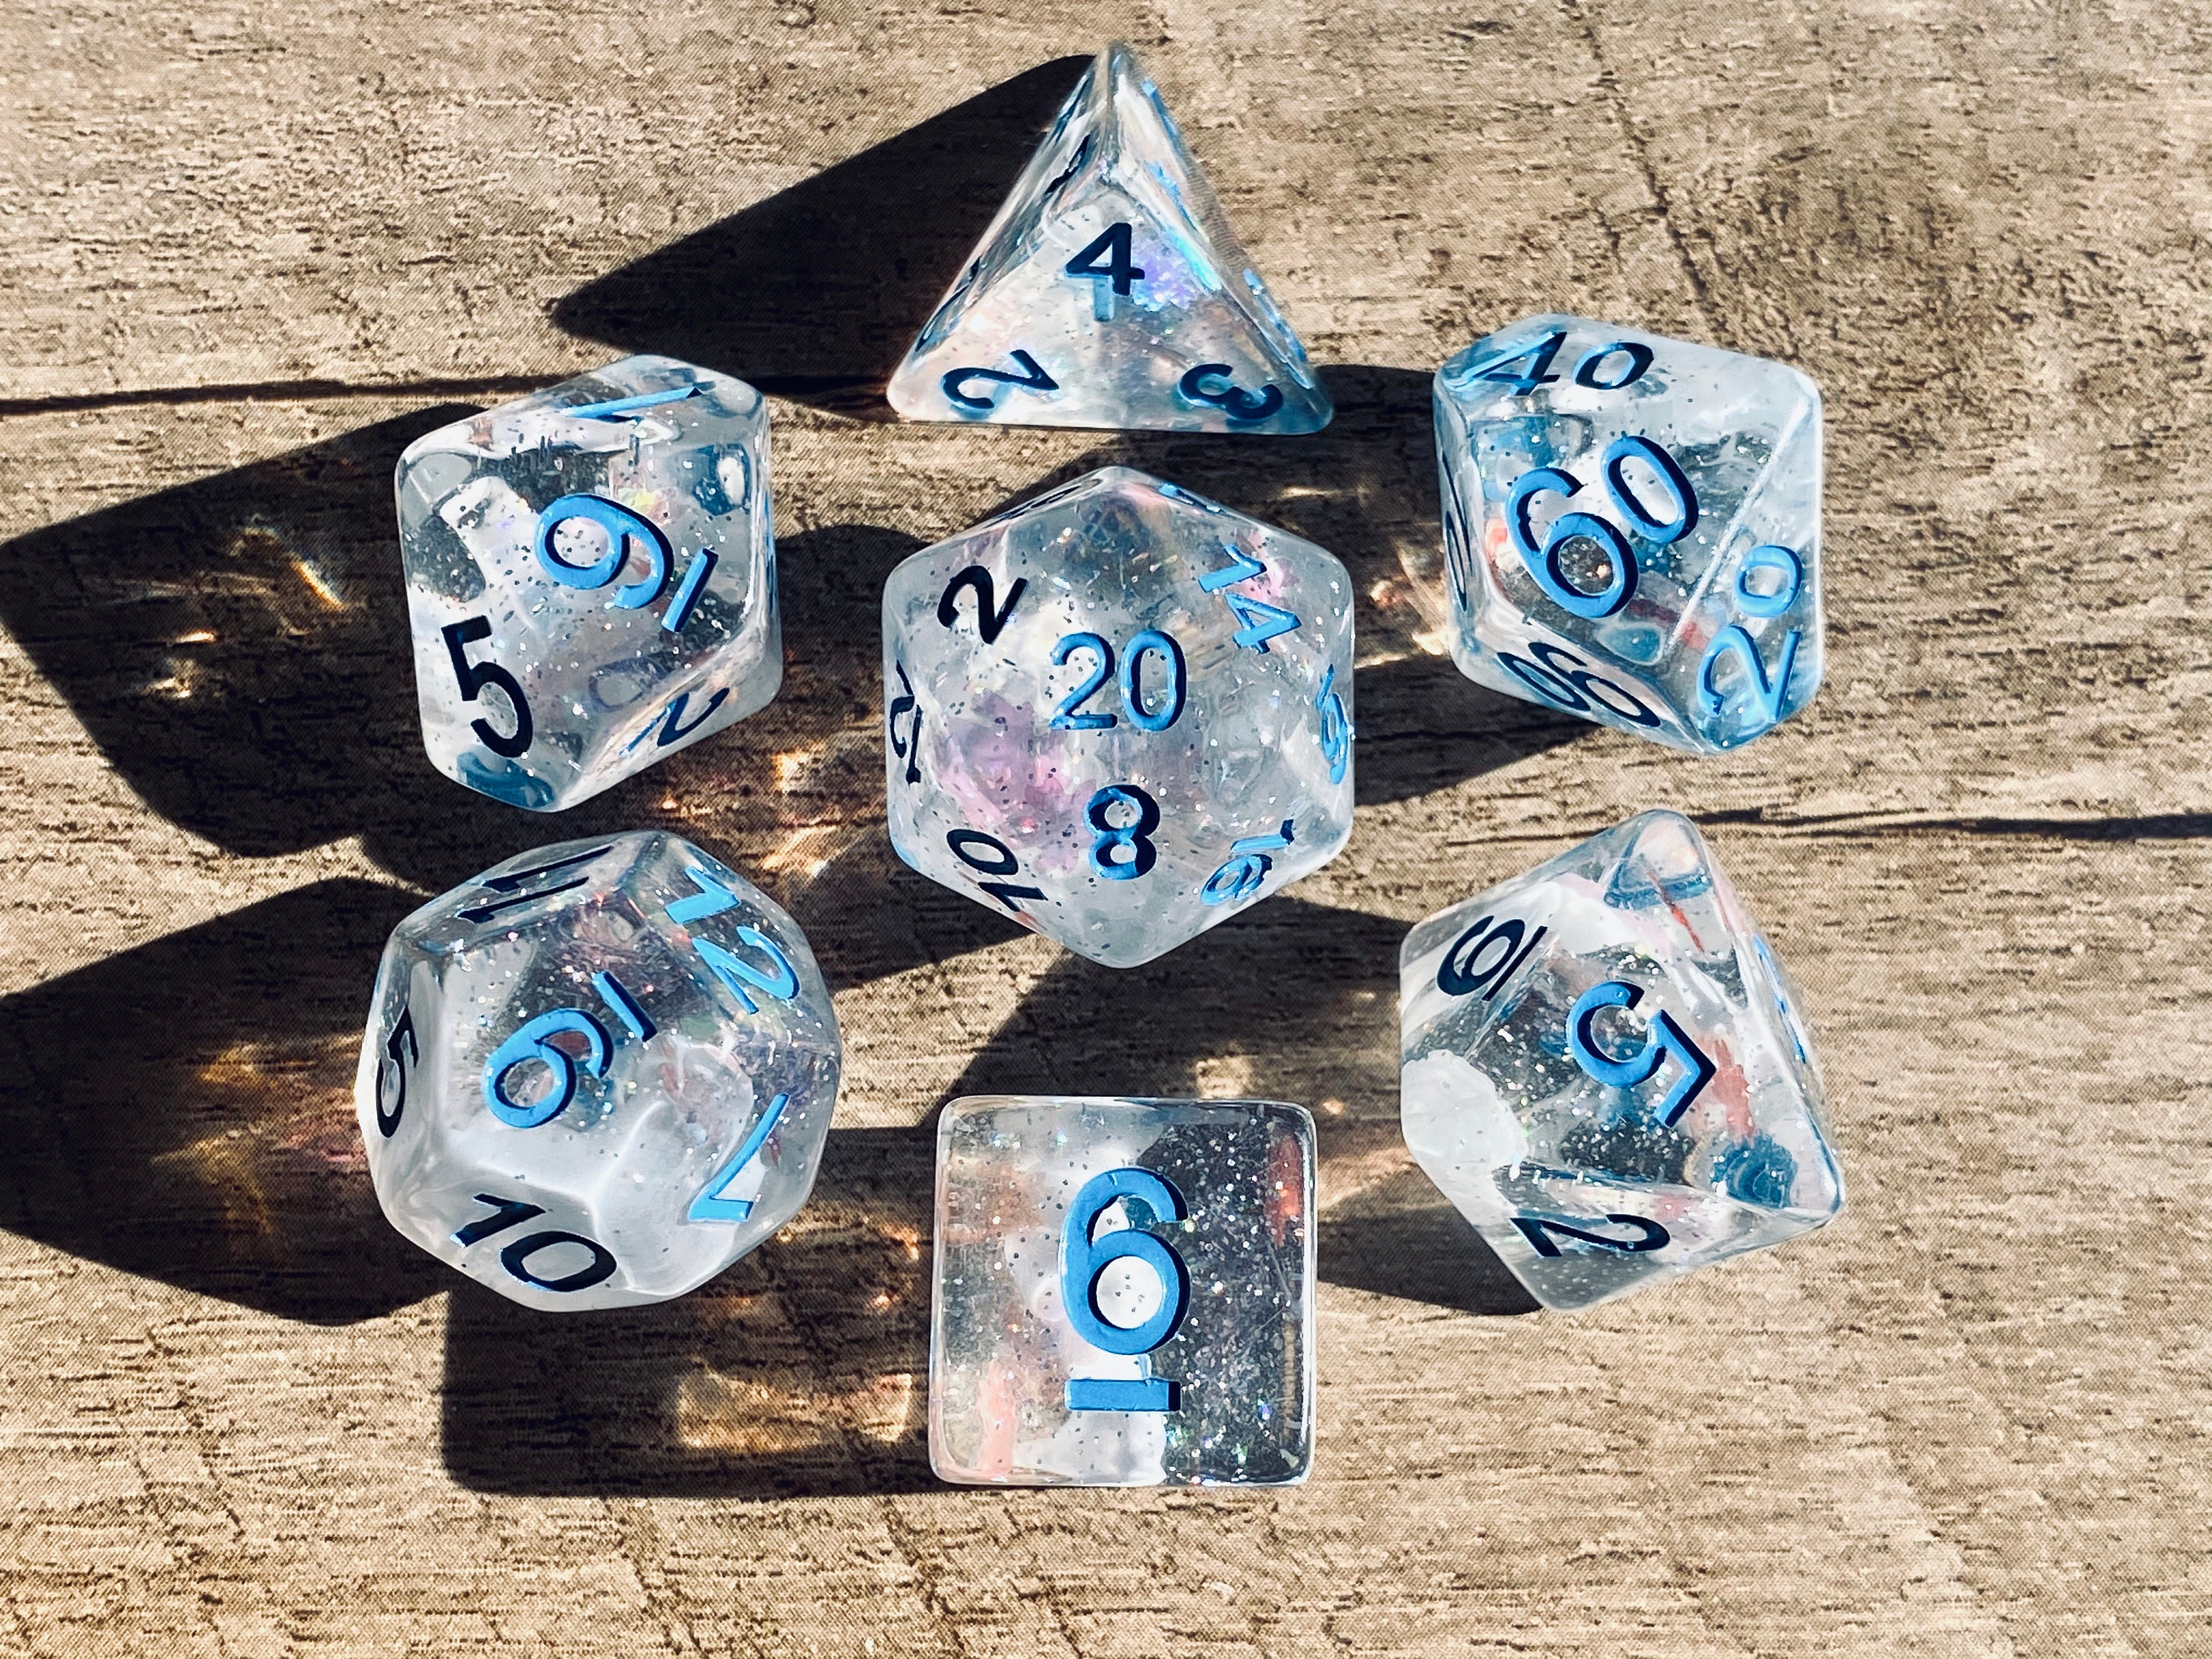 d4 Horizon Glittery Blue White Pearl 4 Sided Polyhedral Dice Lot RPG D&D 5 